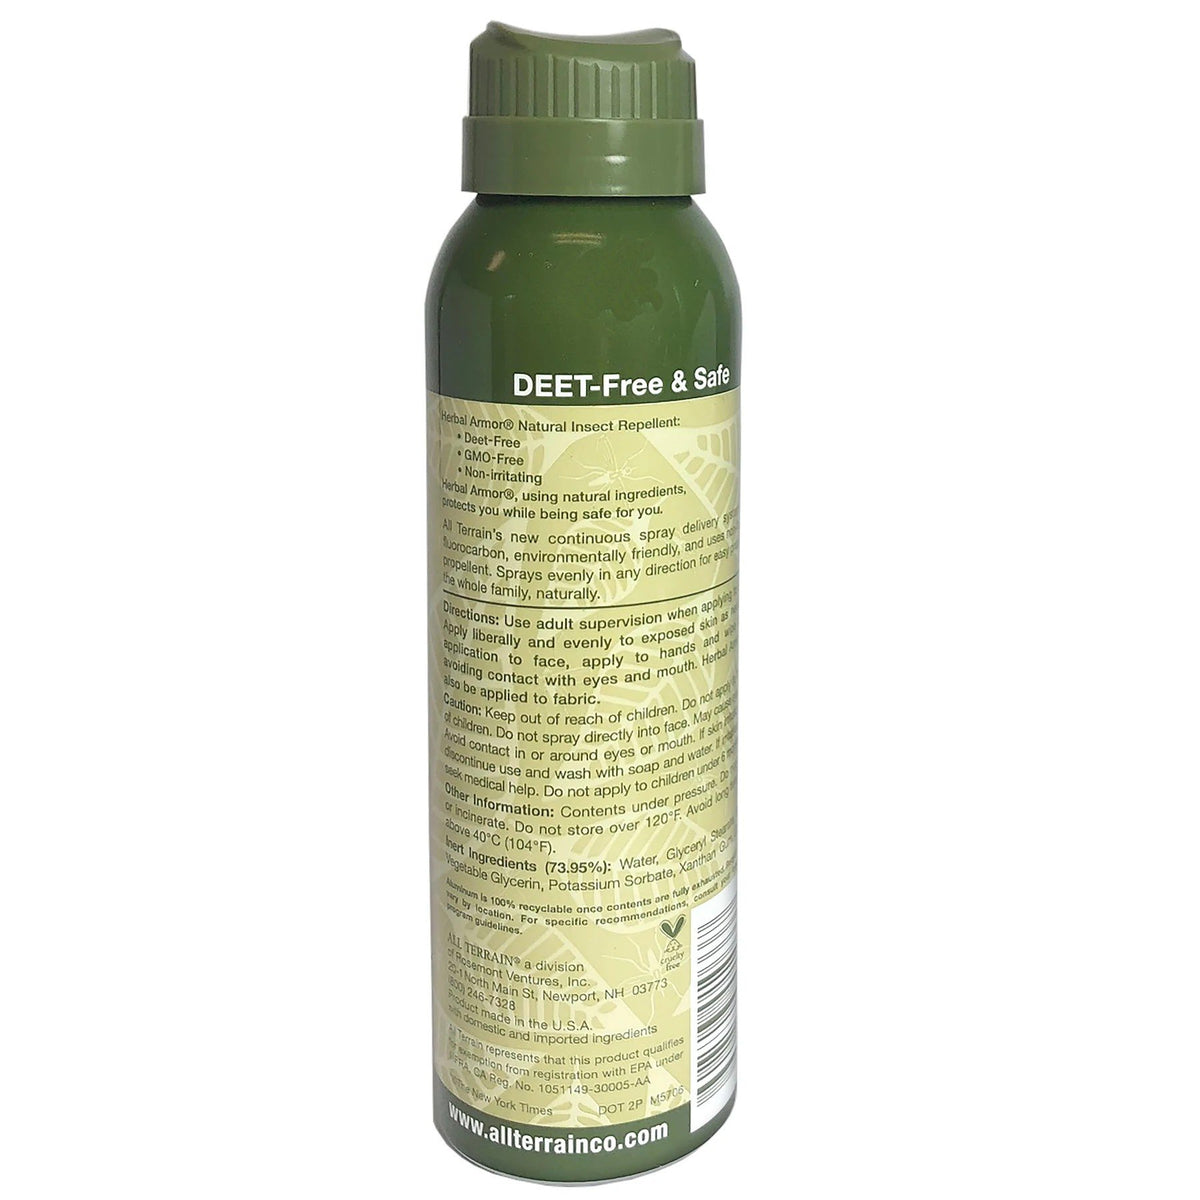 All Terrain Herbal Armor DEET-Free, Natural Insect Repellent, Continuous Spray 3 oz Spray